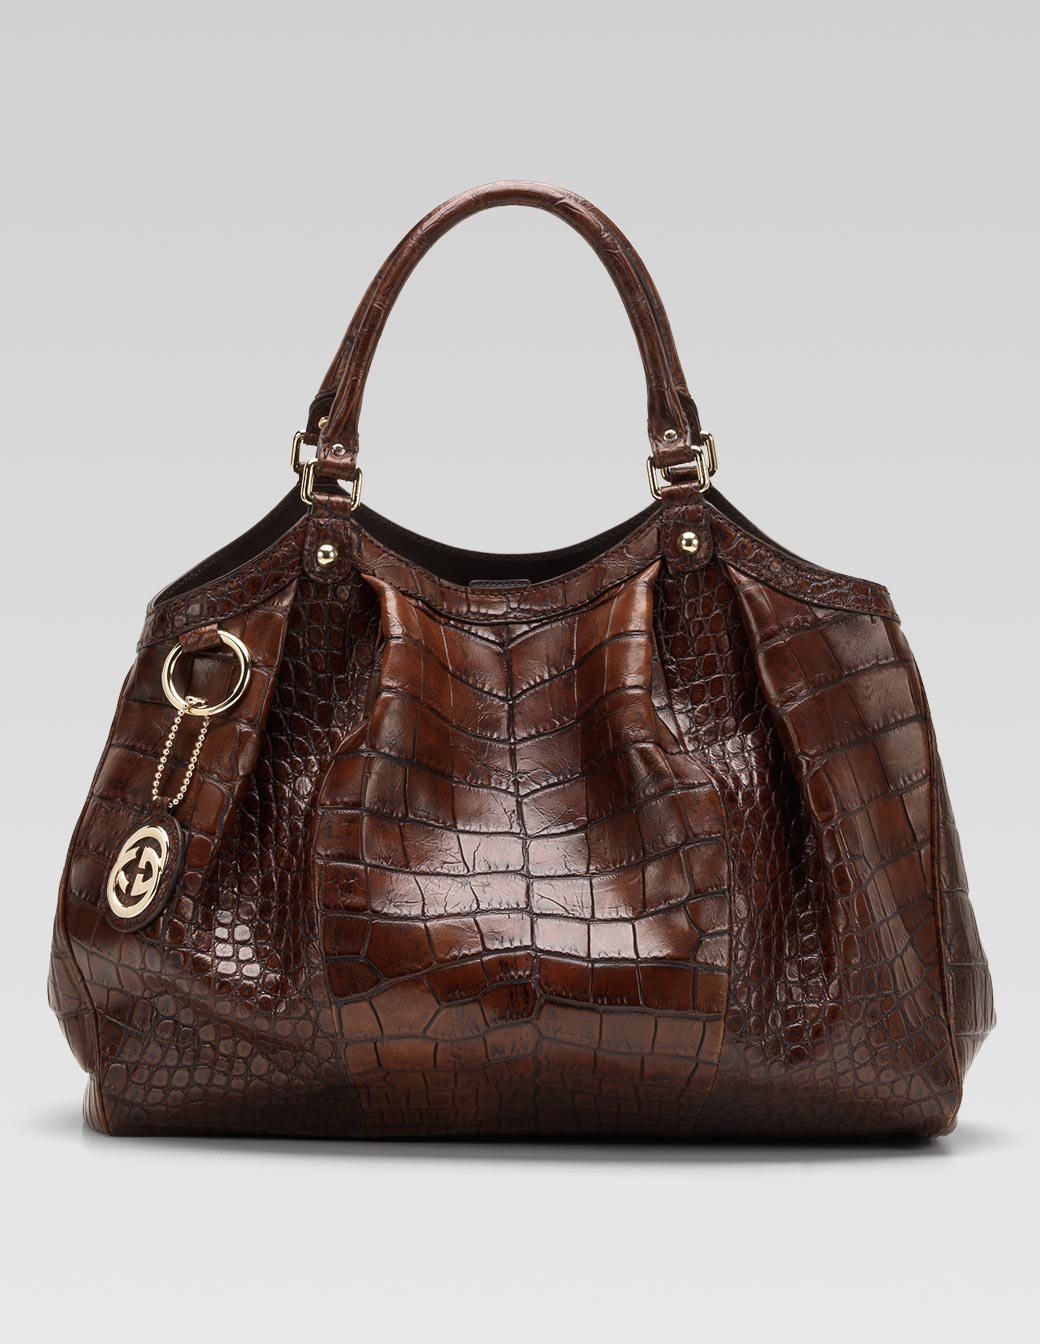 Gucci Latest Handbags Collection For 2010 – 11 Gucci Tote in Brown